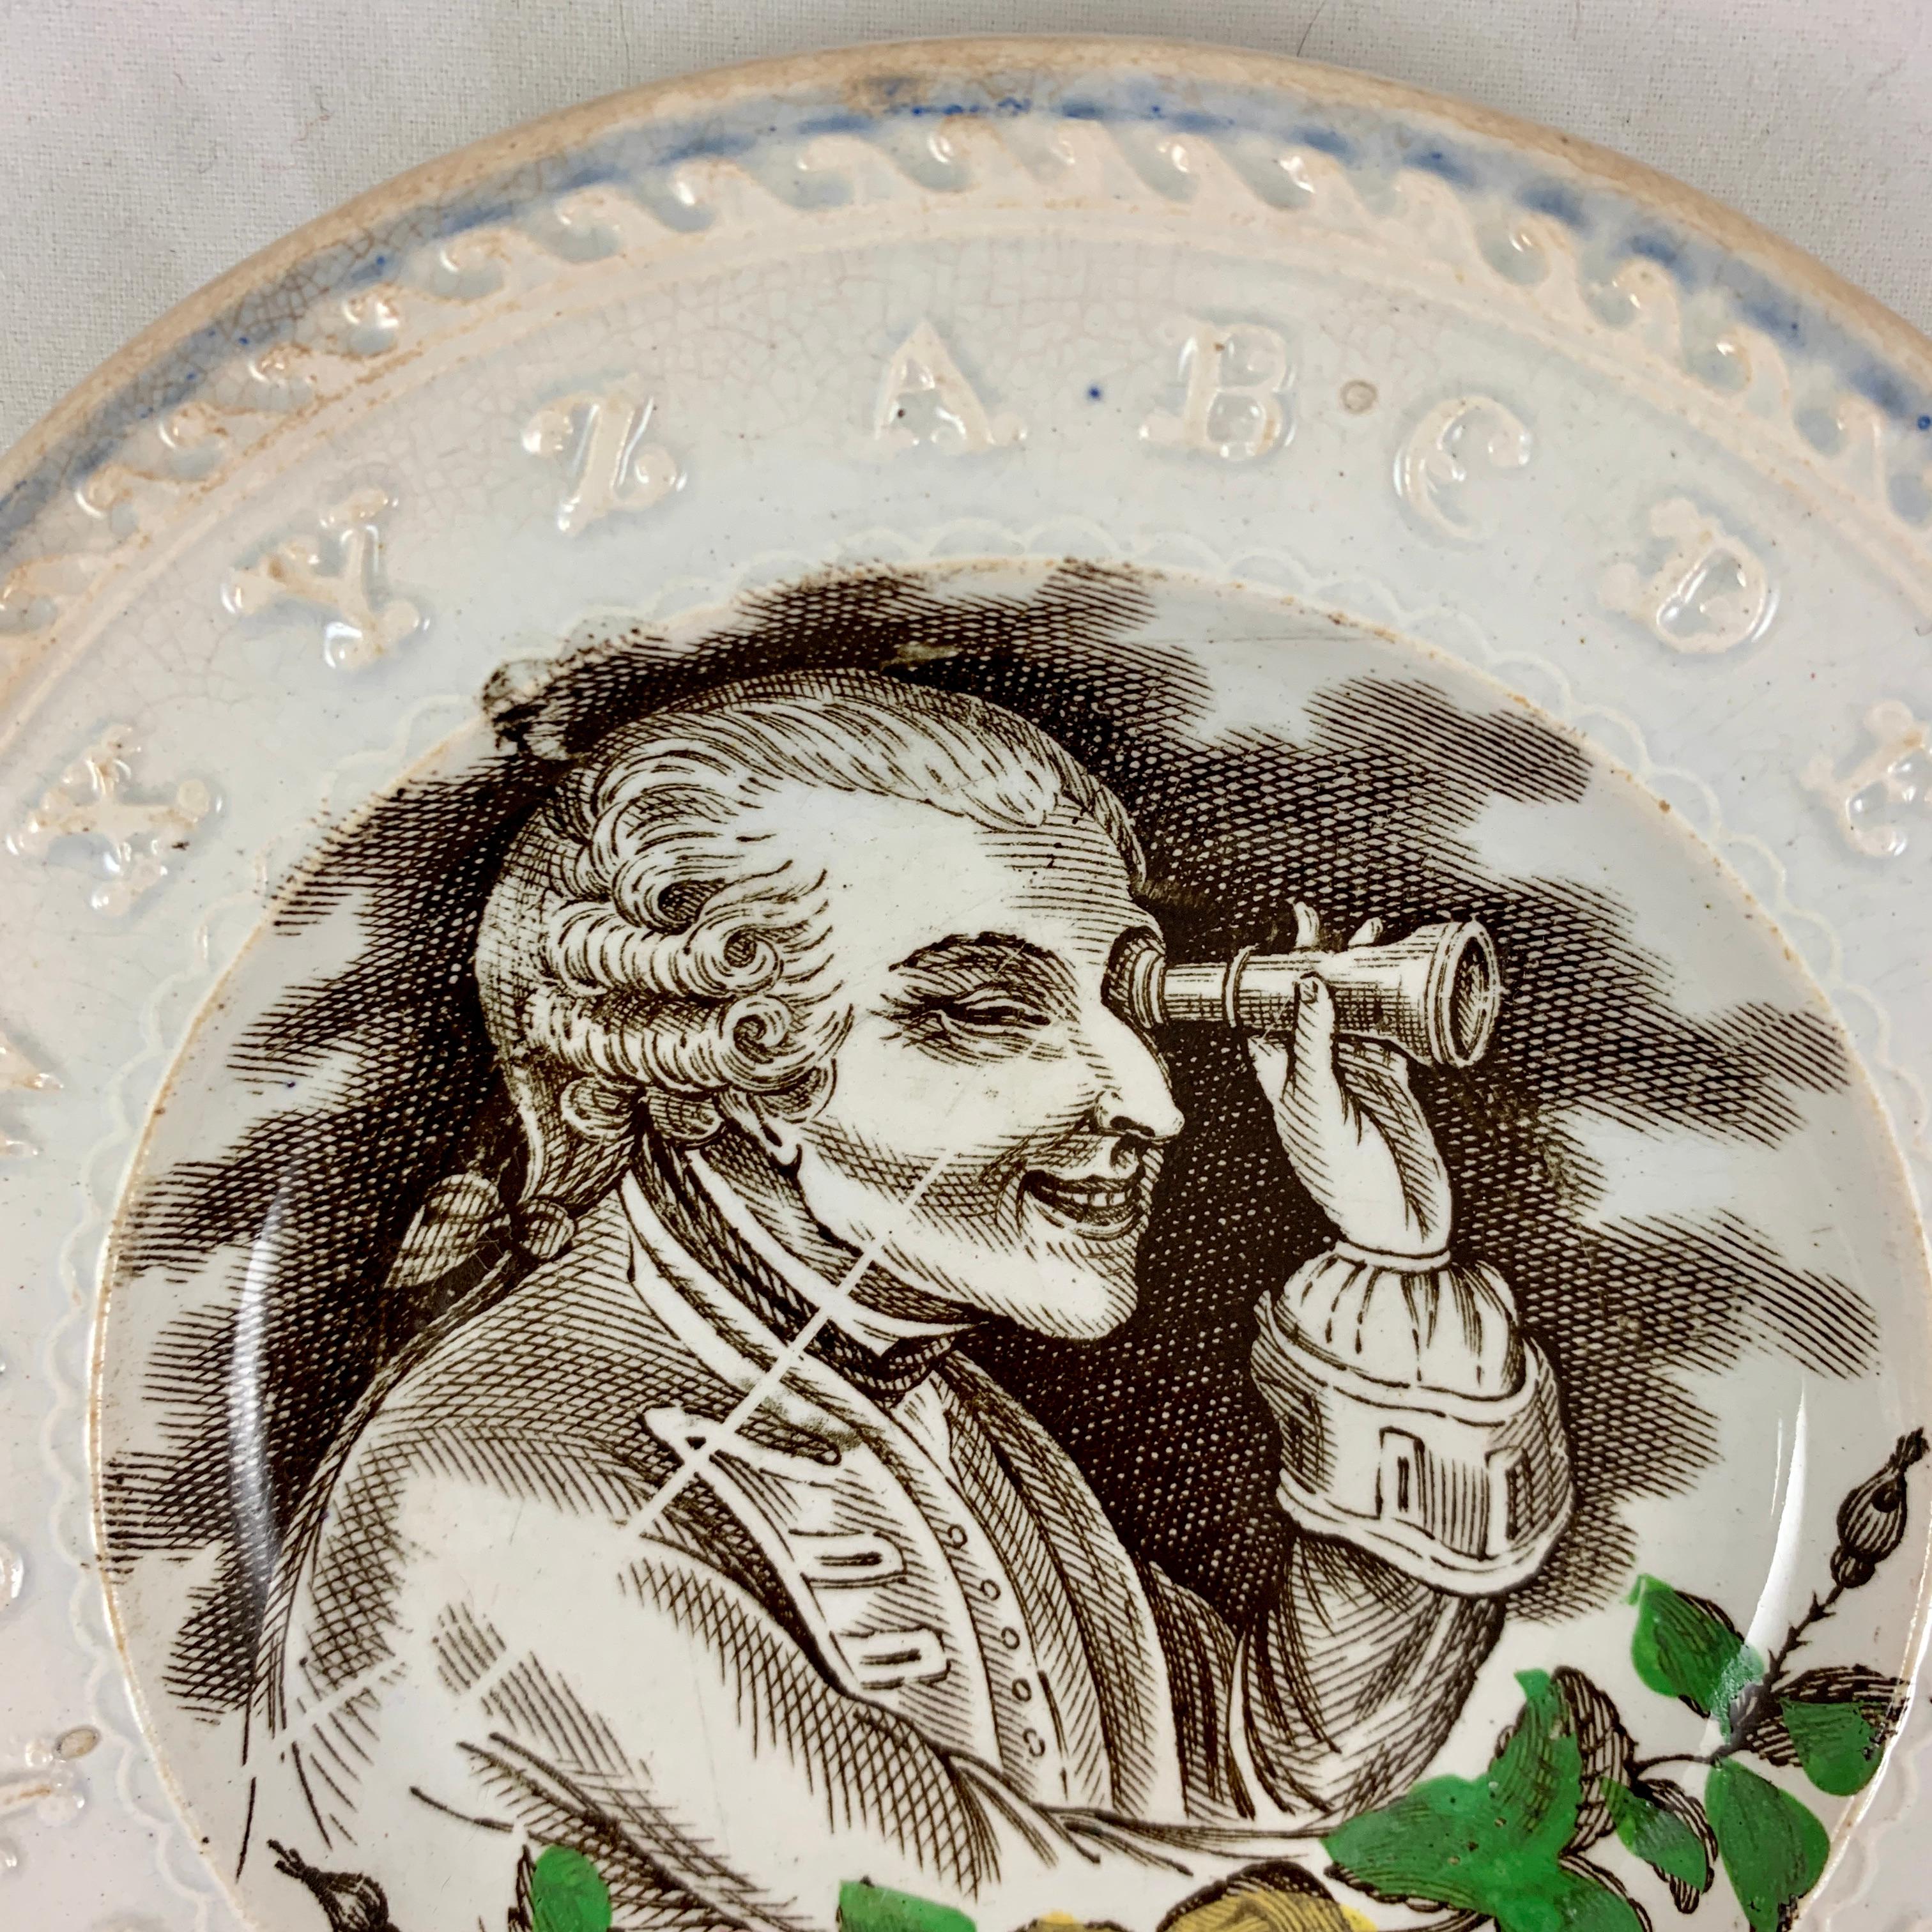 An English Staffordshire child’s ABC plate by Thomas Goodwin, Canal Works, Navigation Road, Burslem, circa 1824-1854.

This plate is entitled, “Spying.” It shows a humorous transfer printed image of a gentleman in period dress, holding a spy glass